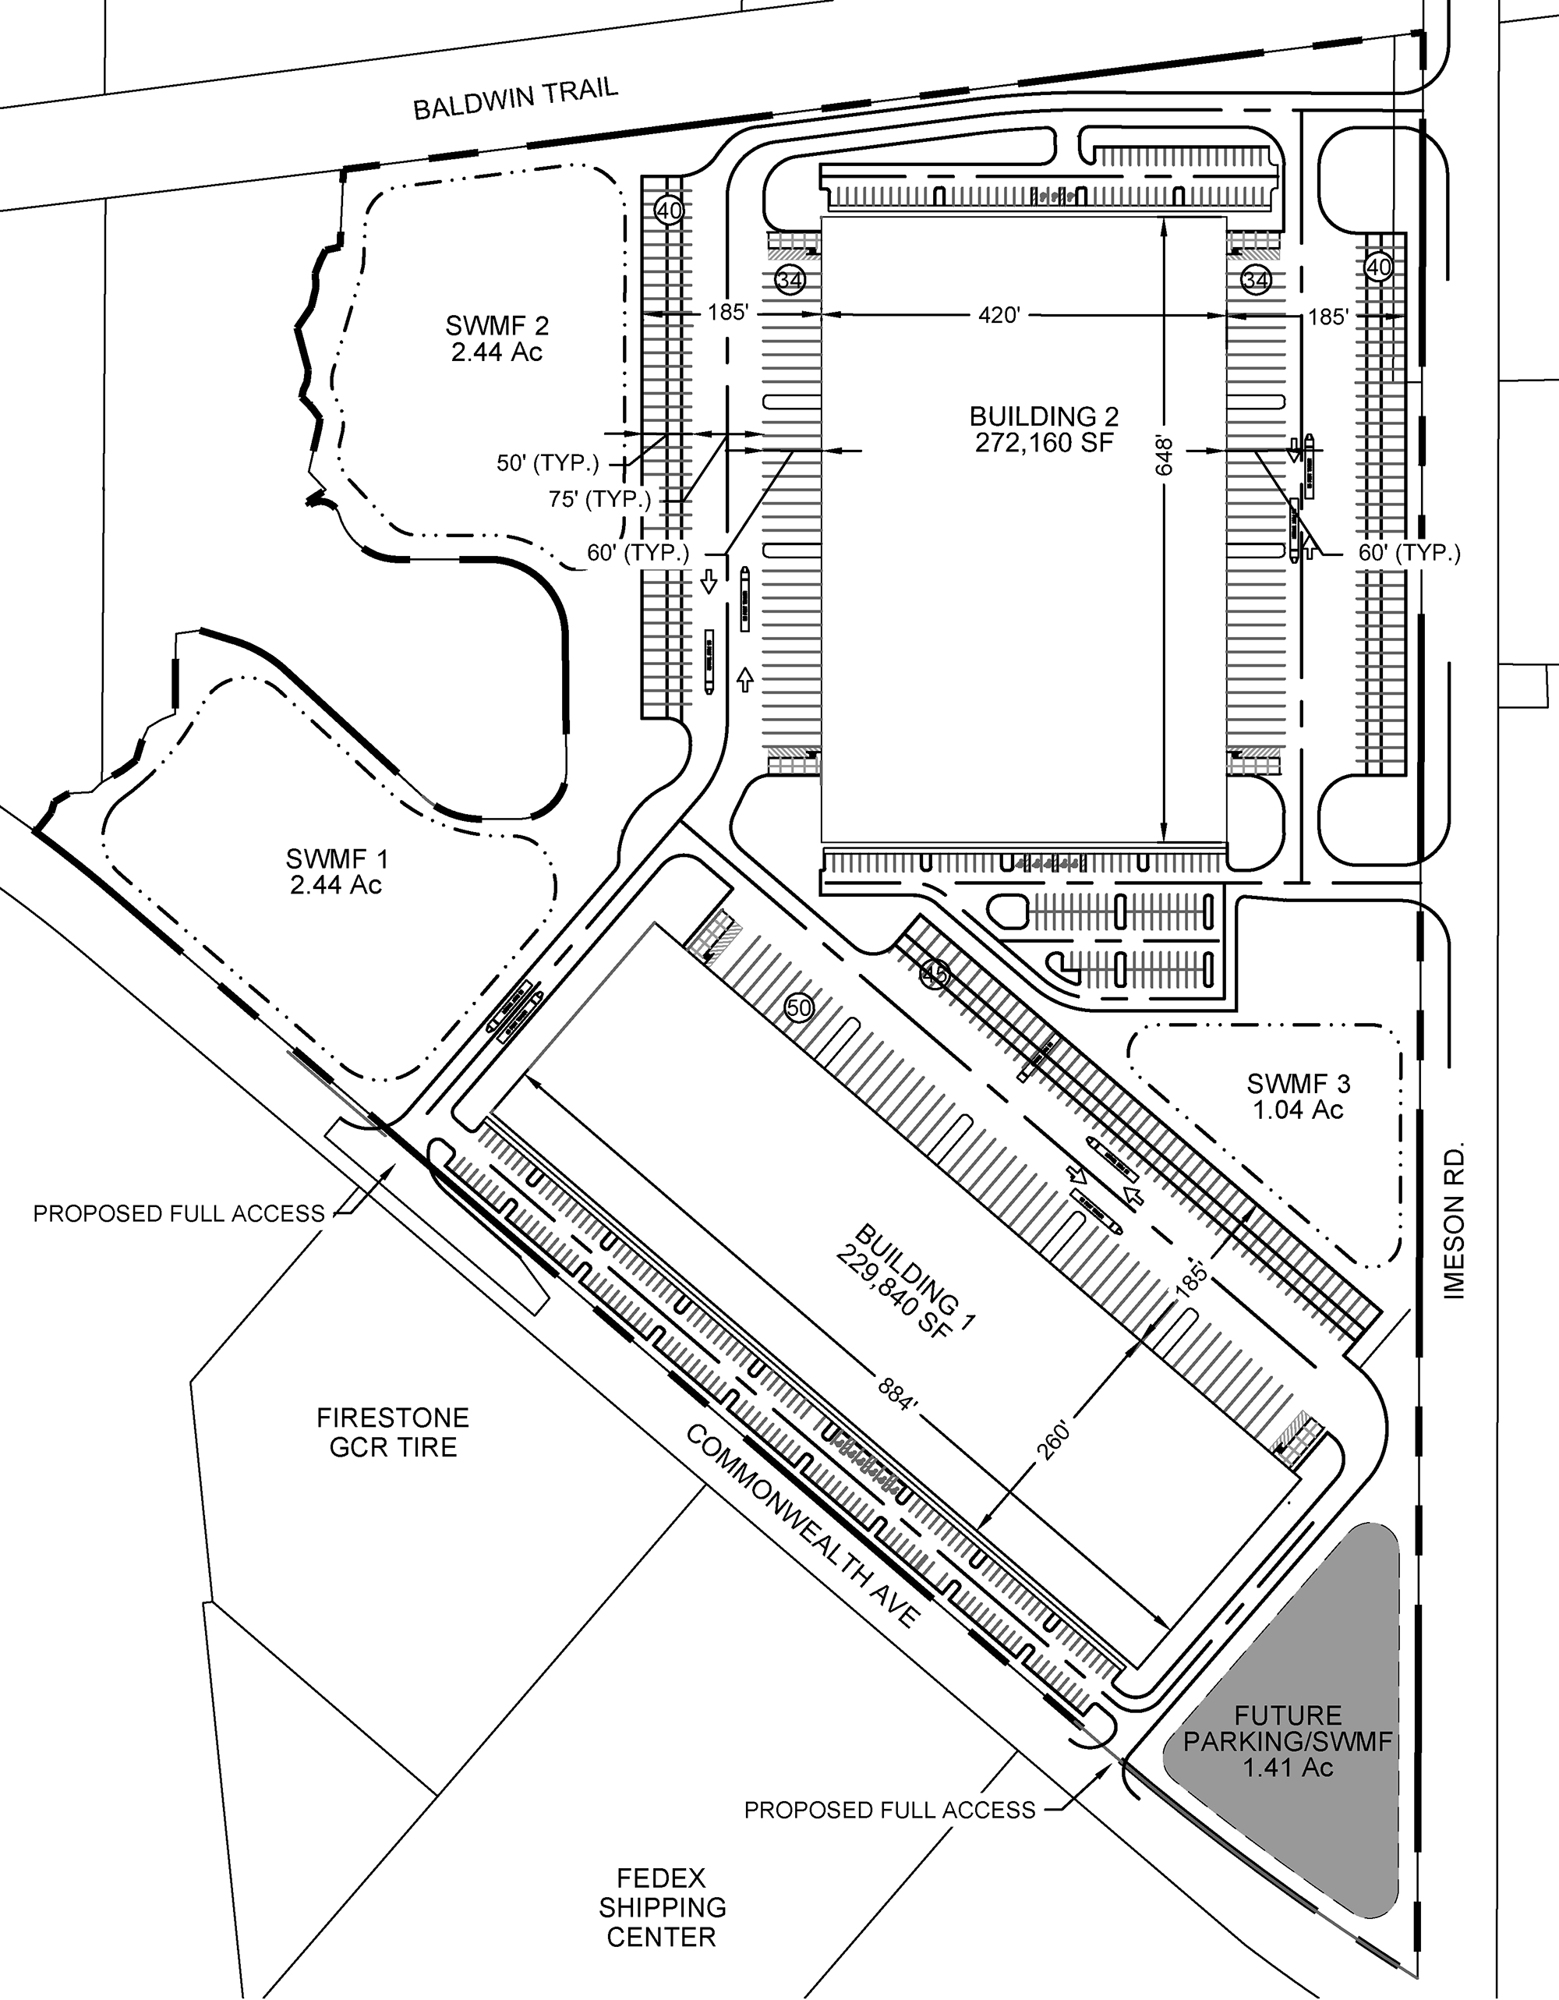 The site plan for the park at northwest Imeson Road and Commonwealth Avenue.